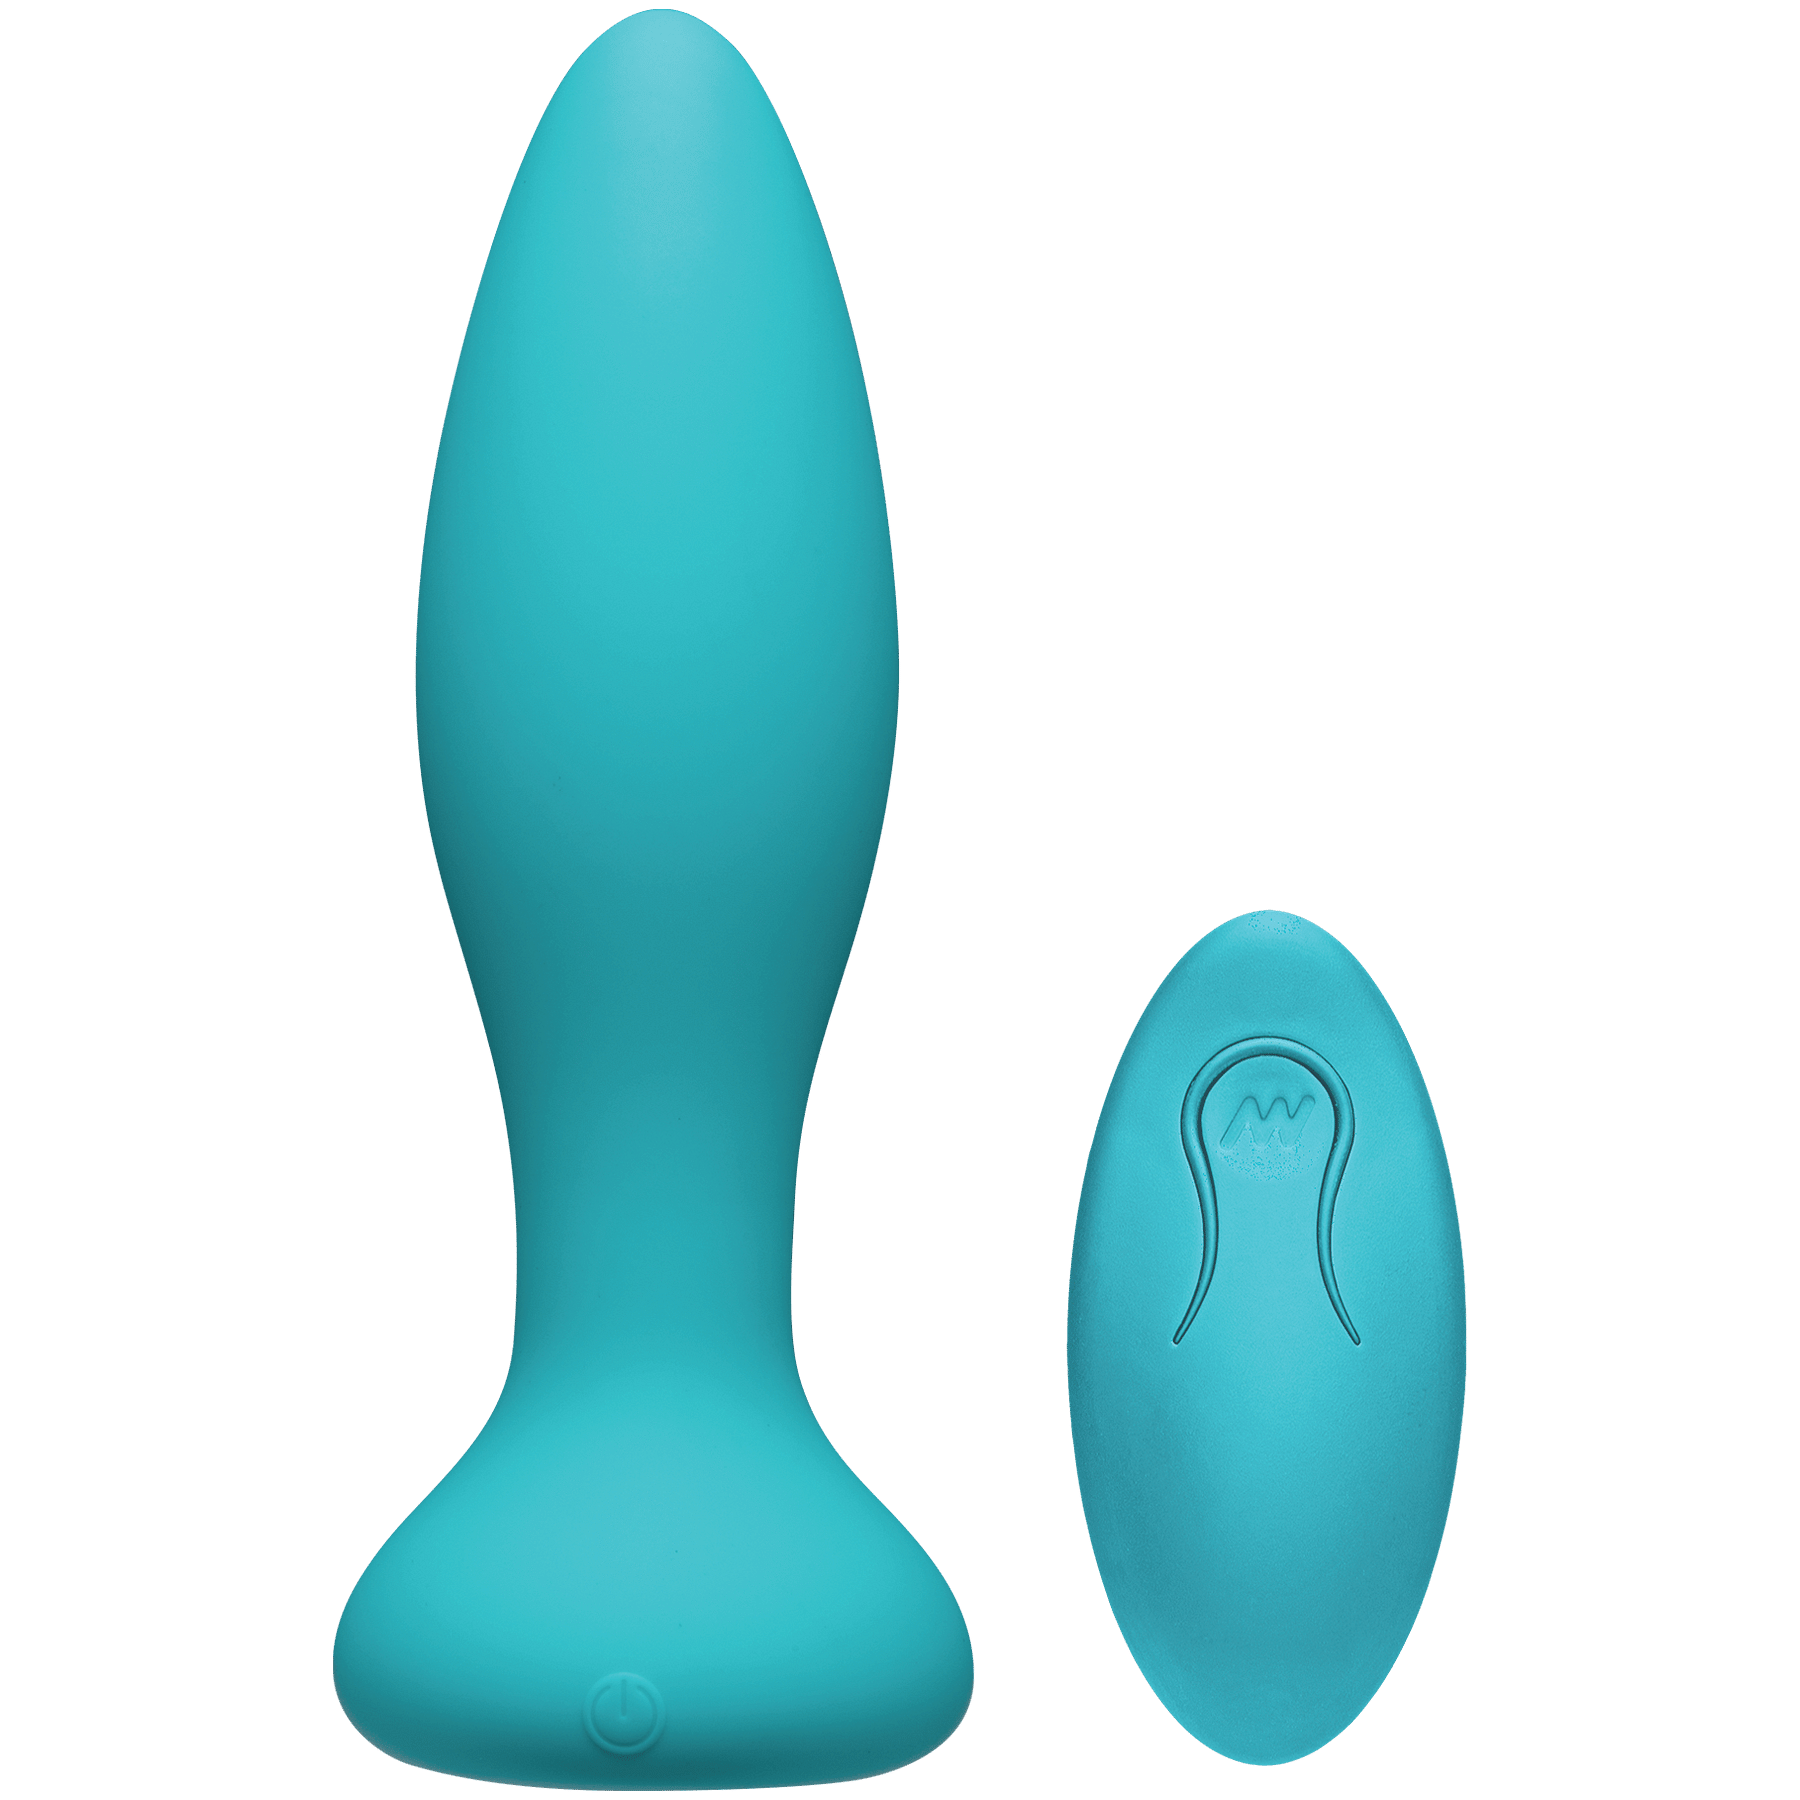 Doc Johnson® A-PLAY Rimmer Experienced Anal Plug w/ Remote Teal - Rolik®